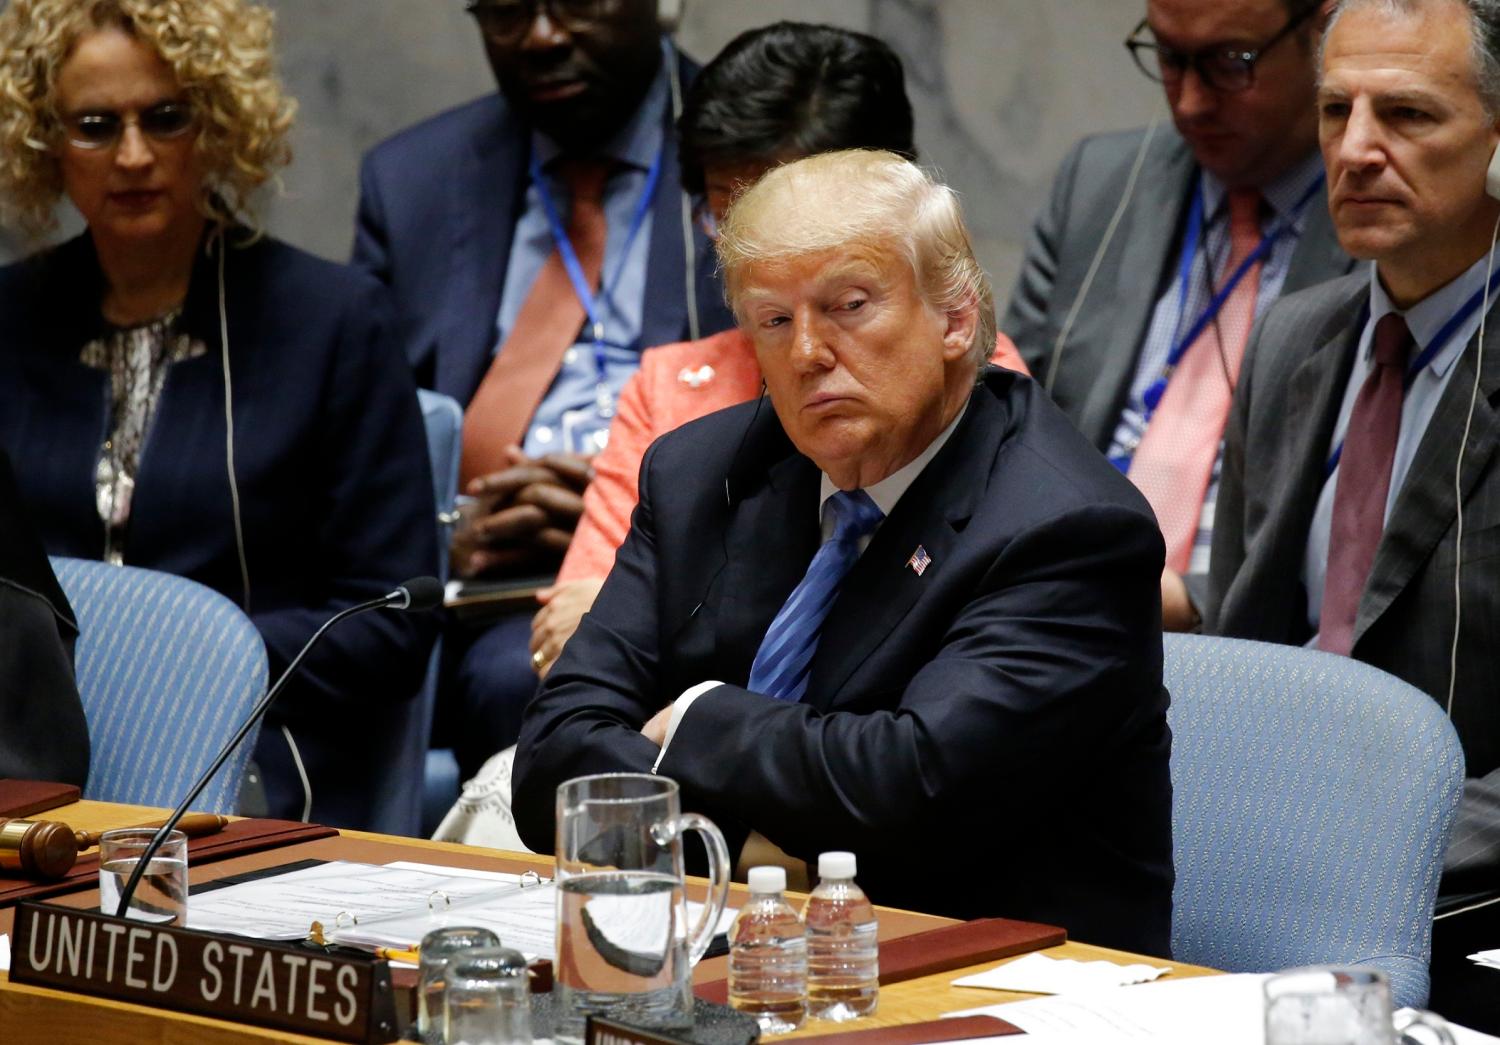 U.S. President Donald Trump listens as he chairs a meeting of the United Nations Security Council held during the 73rd session of the United Nations General Assembly at U.N. headquarters in New York, U.S., September 26, 2018. REUTERS/Eduardo Munoz - HP1EE9Q15Z3BQ